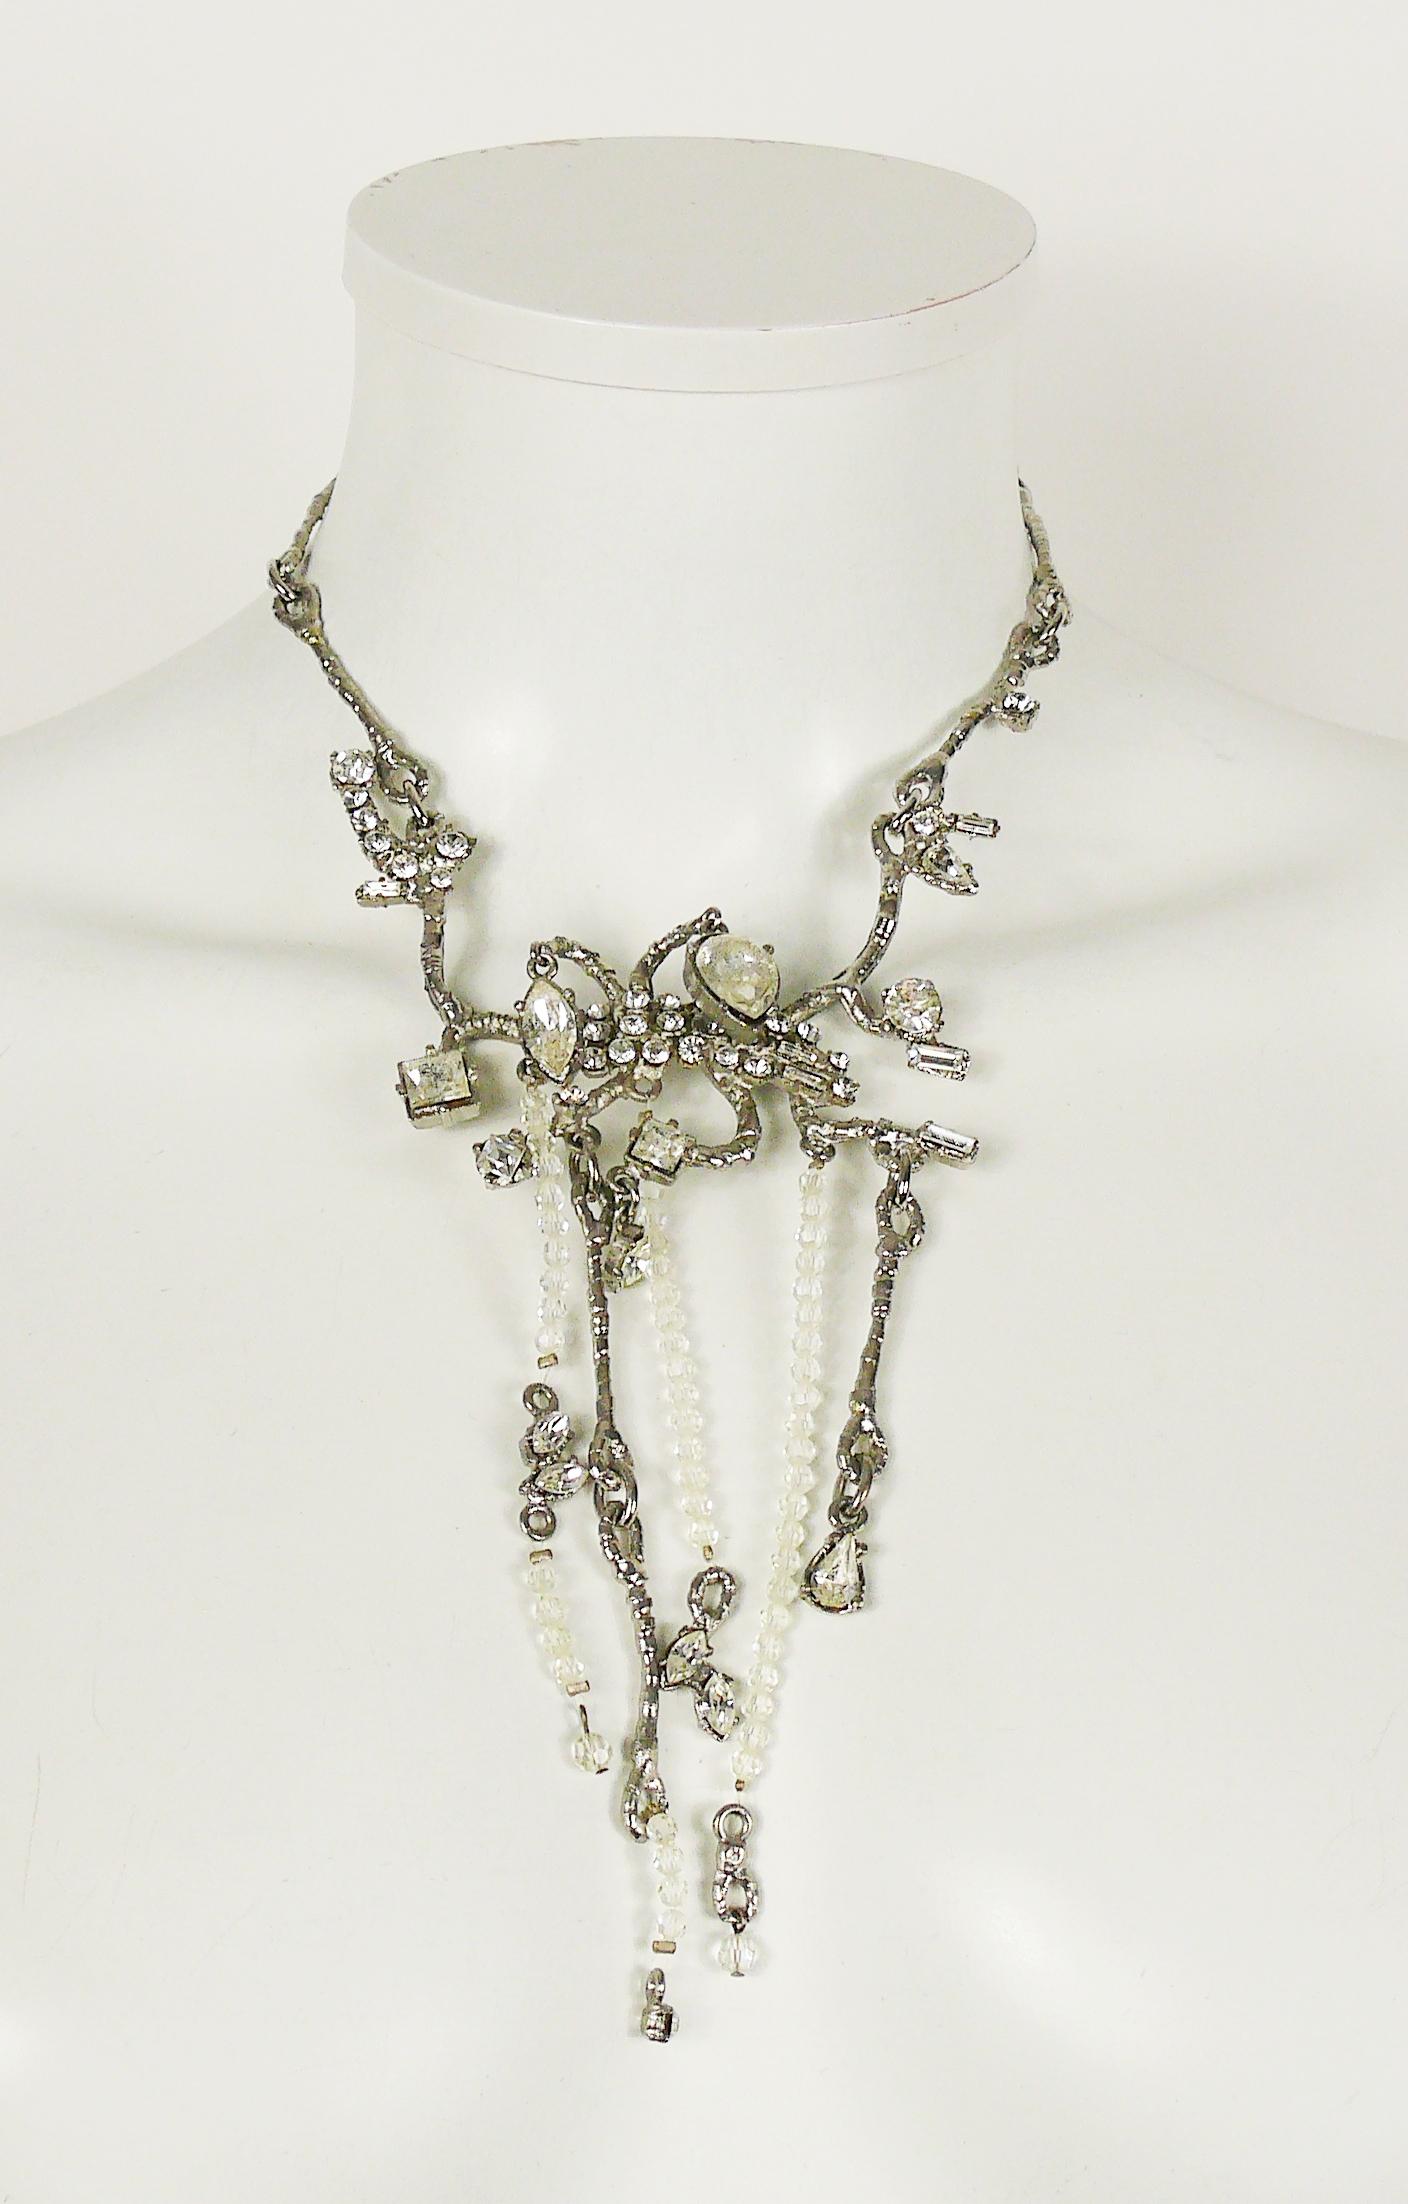 CHRISTIAN LACROIX vintage silver toned necklace featuring branches design embellished with clear crystals and glass beads.

T-bar closure.

Marked CHRISTIAN LACROIX CL Made in France.

Indicative measurements : adjustable length from approx. 35 cm